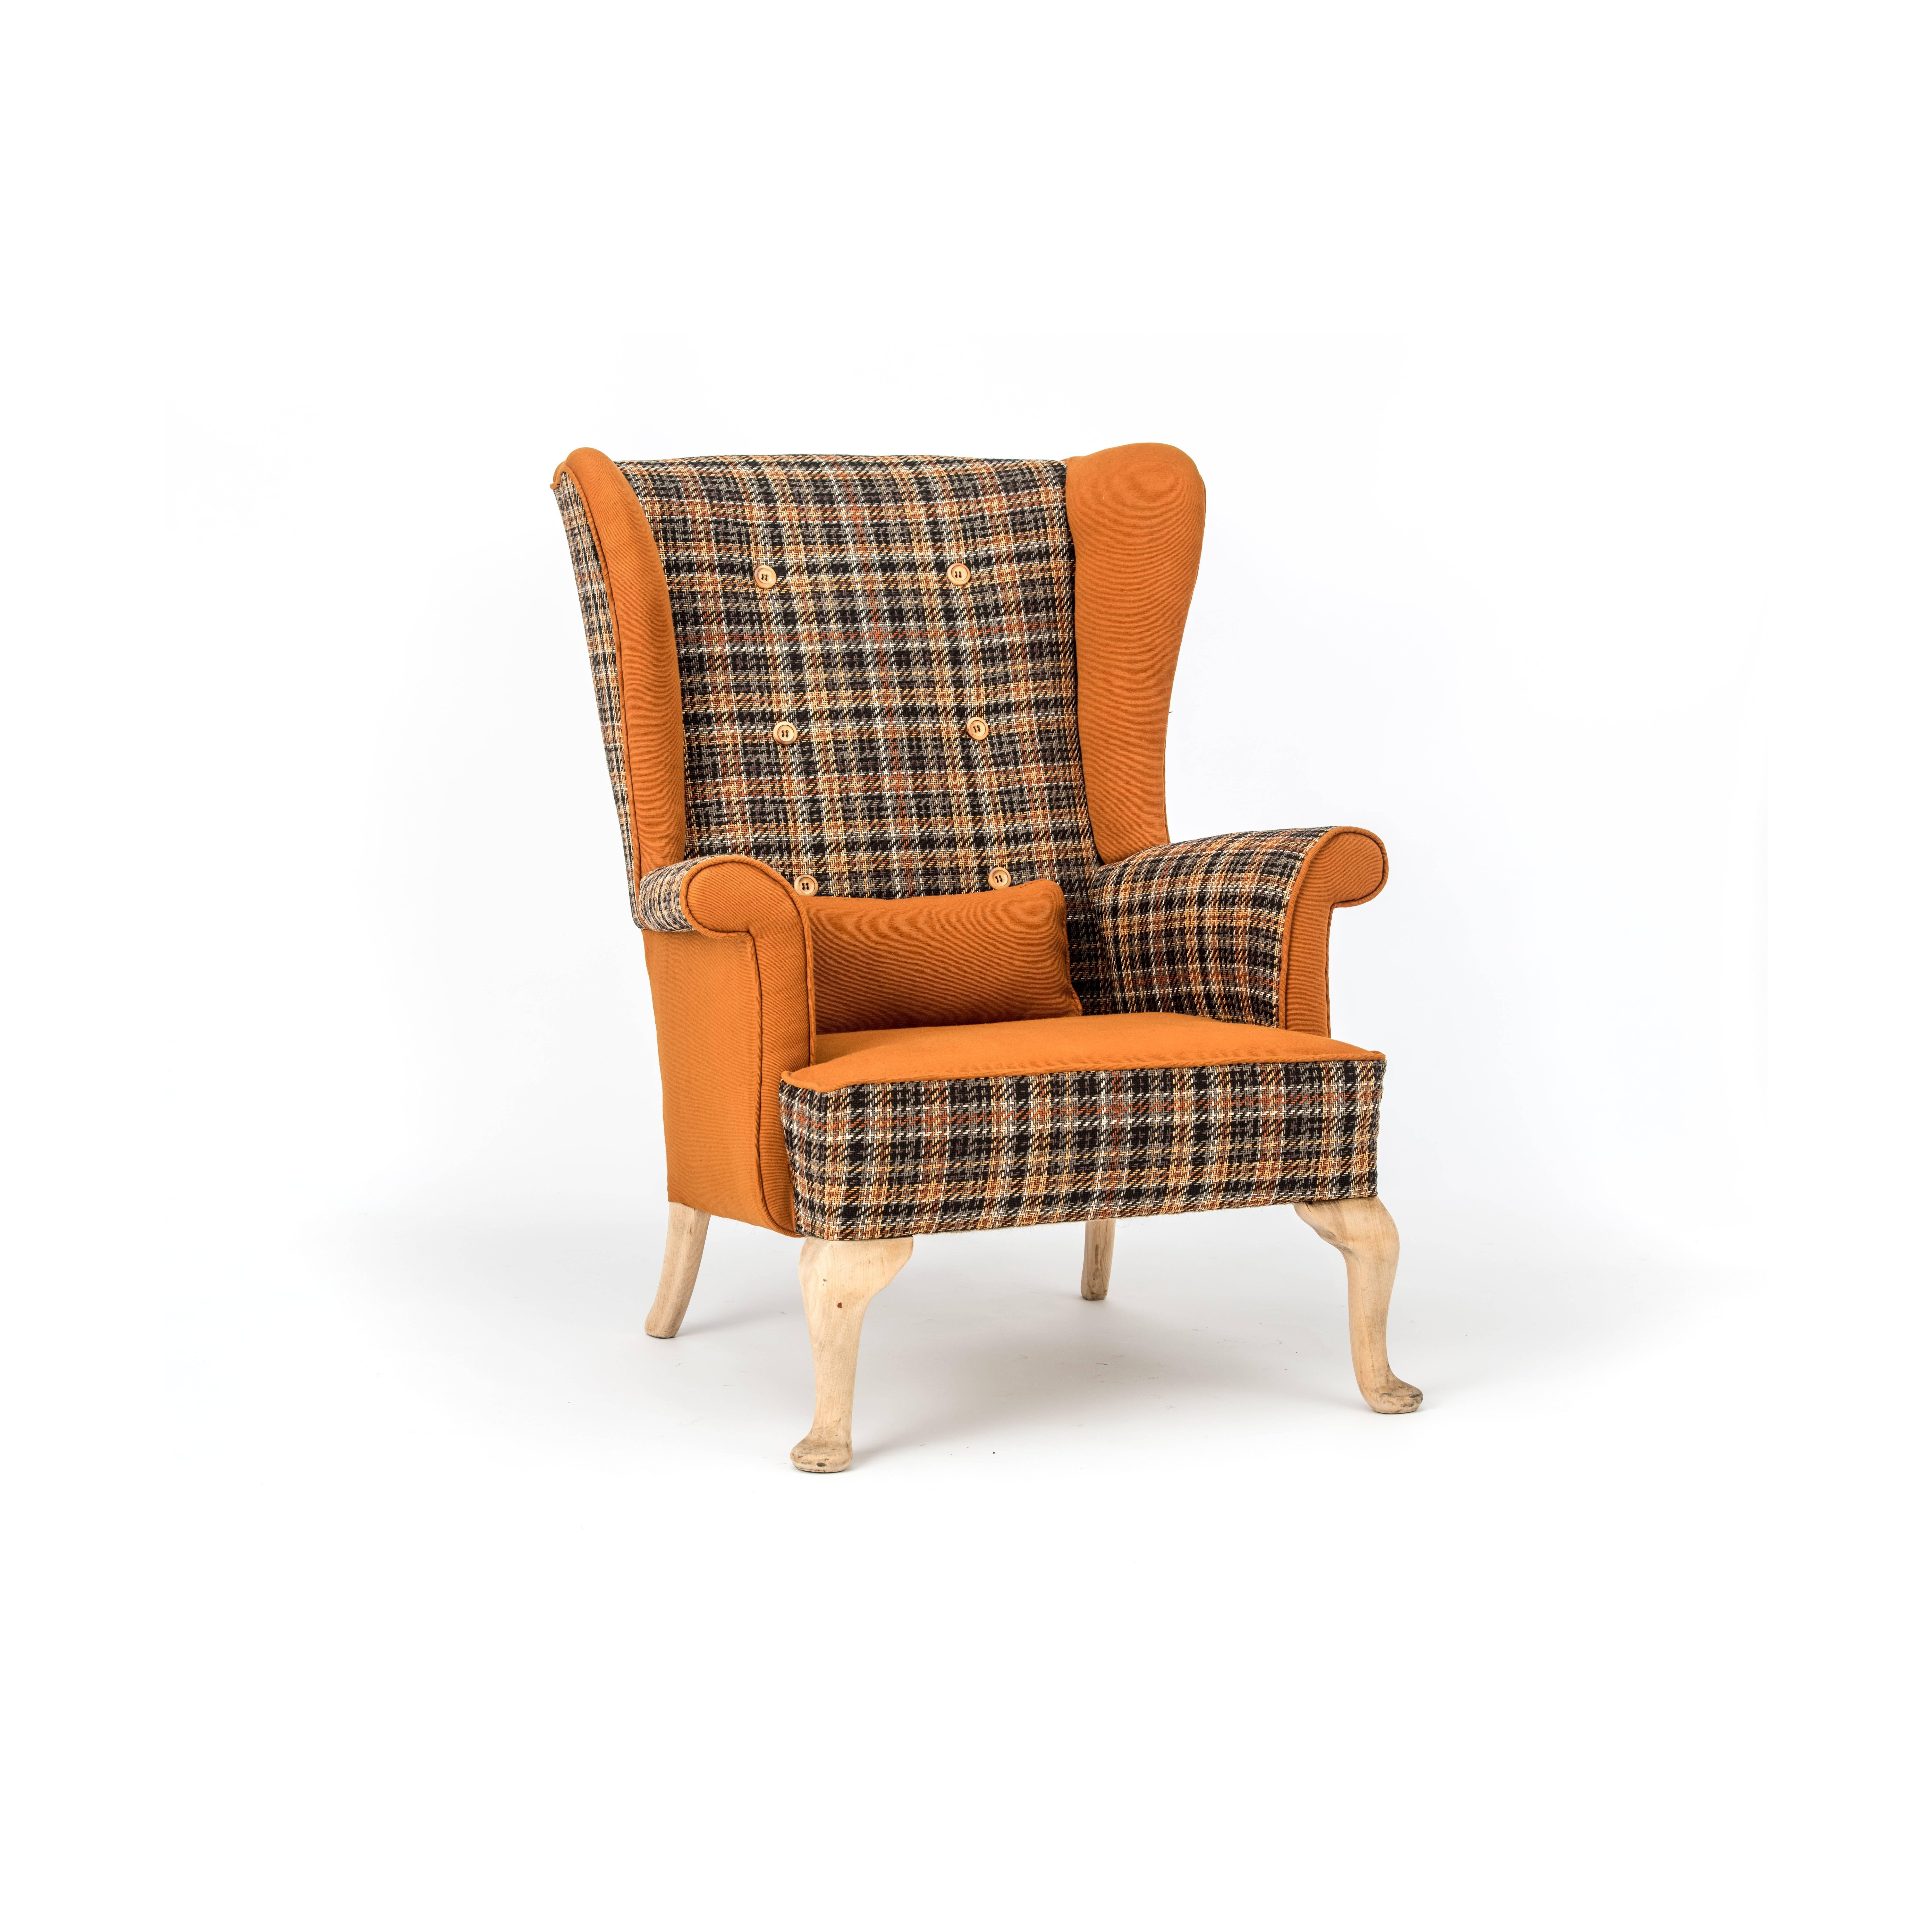 Original 1970's Parker Knoll unique retro fireside wing chair reupholstered in a funky 'Autumn Nut' tweed with contrasting toffee panels with six burnt wooden deep buttoned back detail and resting on original sanded legs. Complete with contrasting